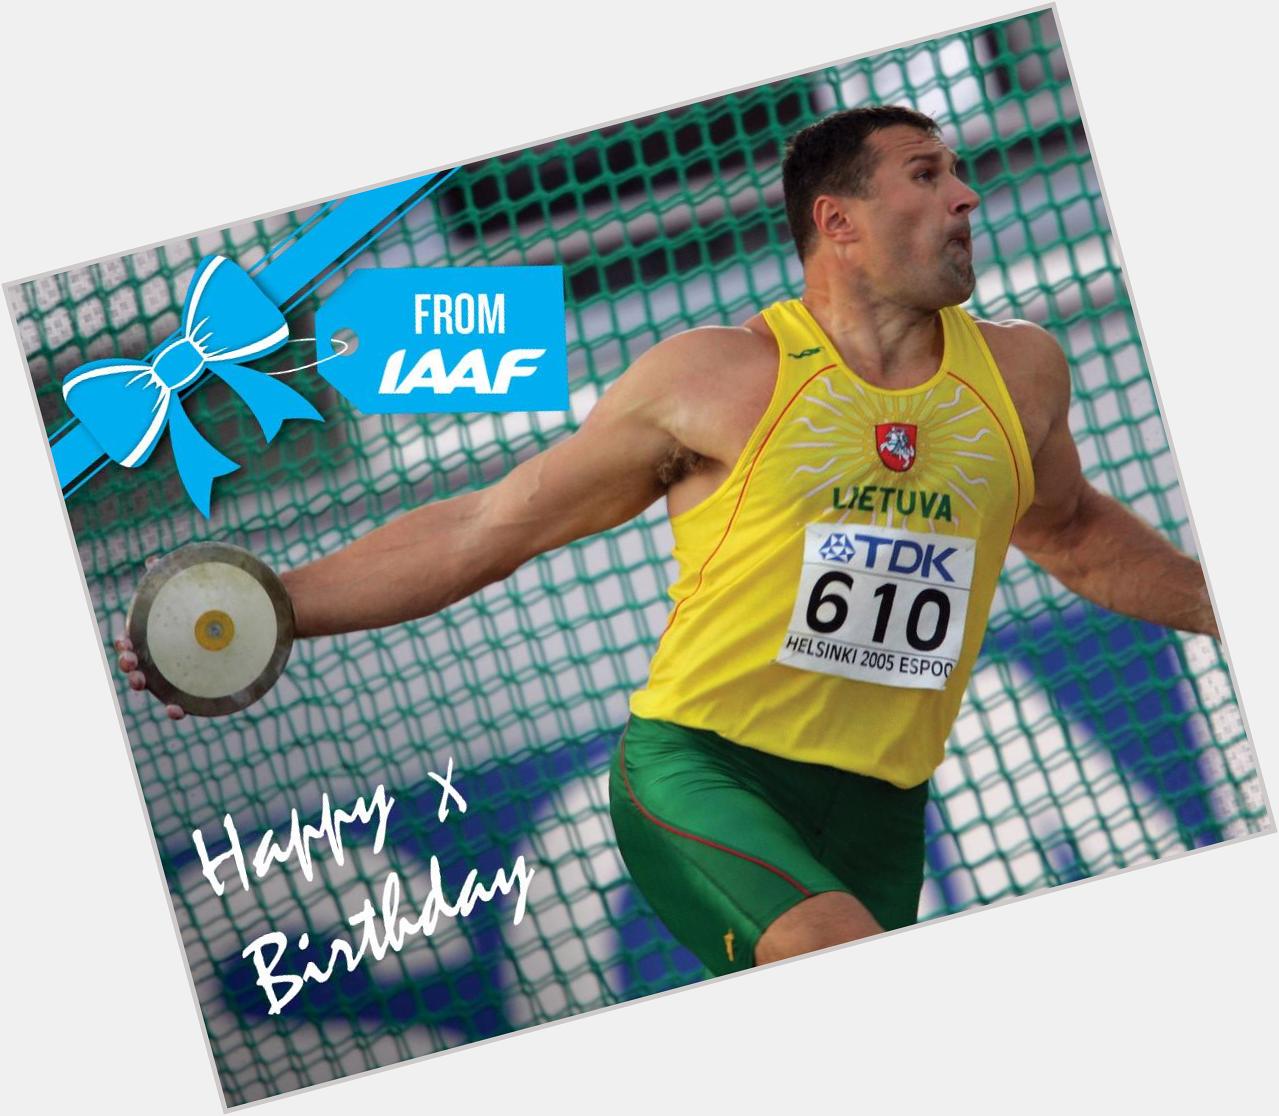 Happy birthday to two-time world and double Olympic discus champion Virgilijus Alekna! 